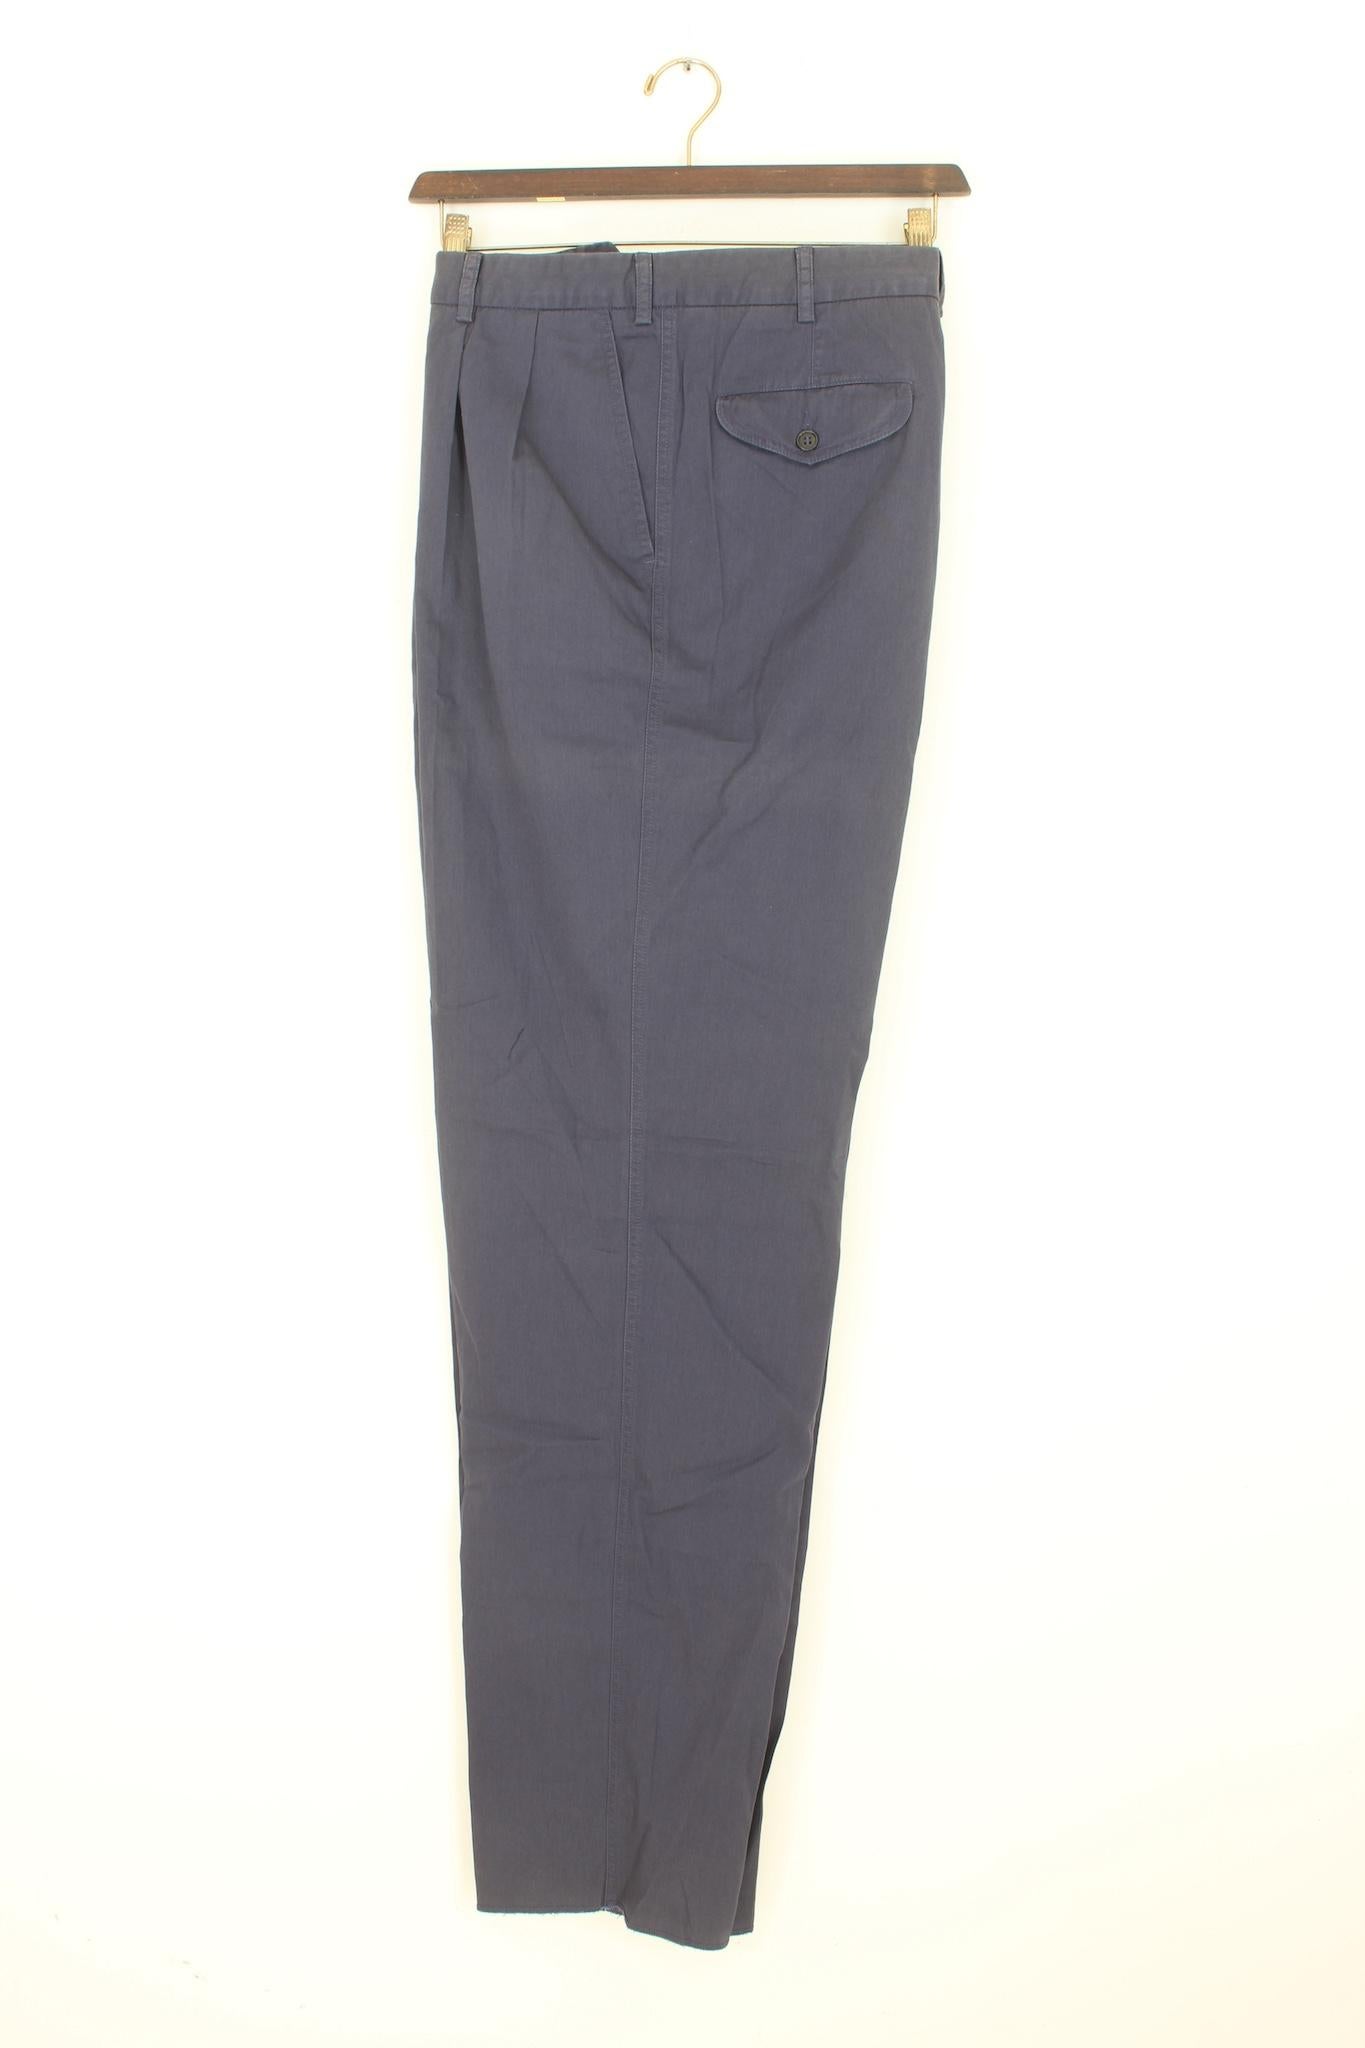 Burberry vintage 90s trousers. Blue colour, side pockets, button and zip closure. 100% cotton fabric. Made in Italy.

Size: 58 It 48 Us 48 Uk

Waist: 50 cm
Length: 126 cm
Inseam length: 98 cm
Hem: 23 cm